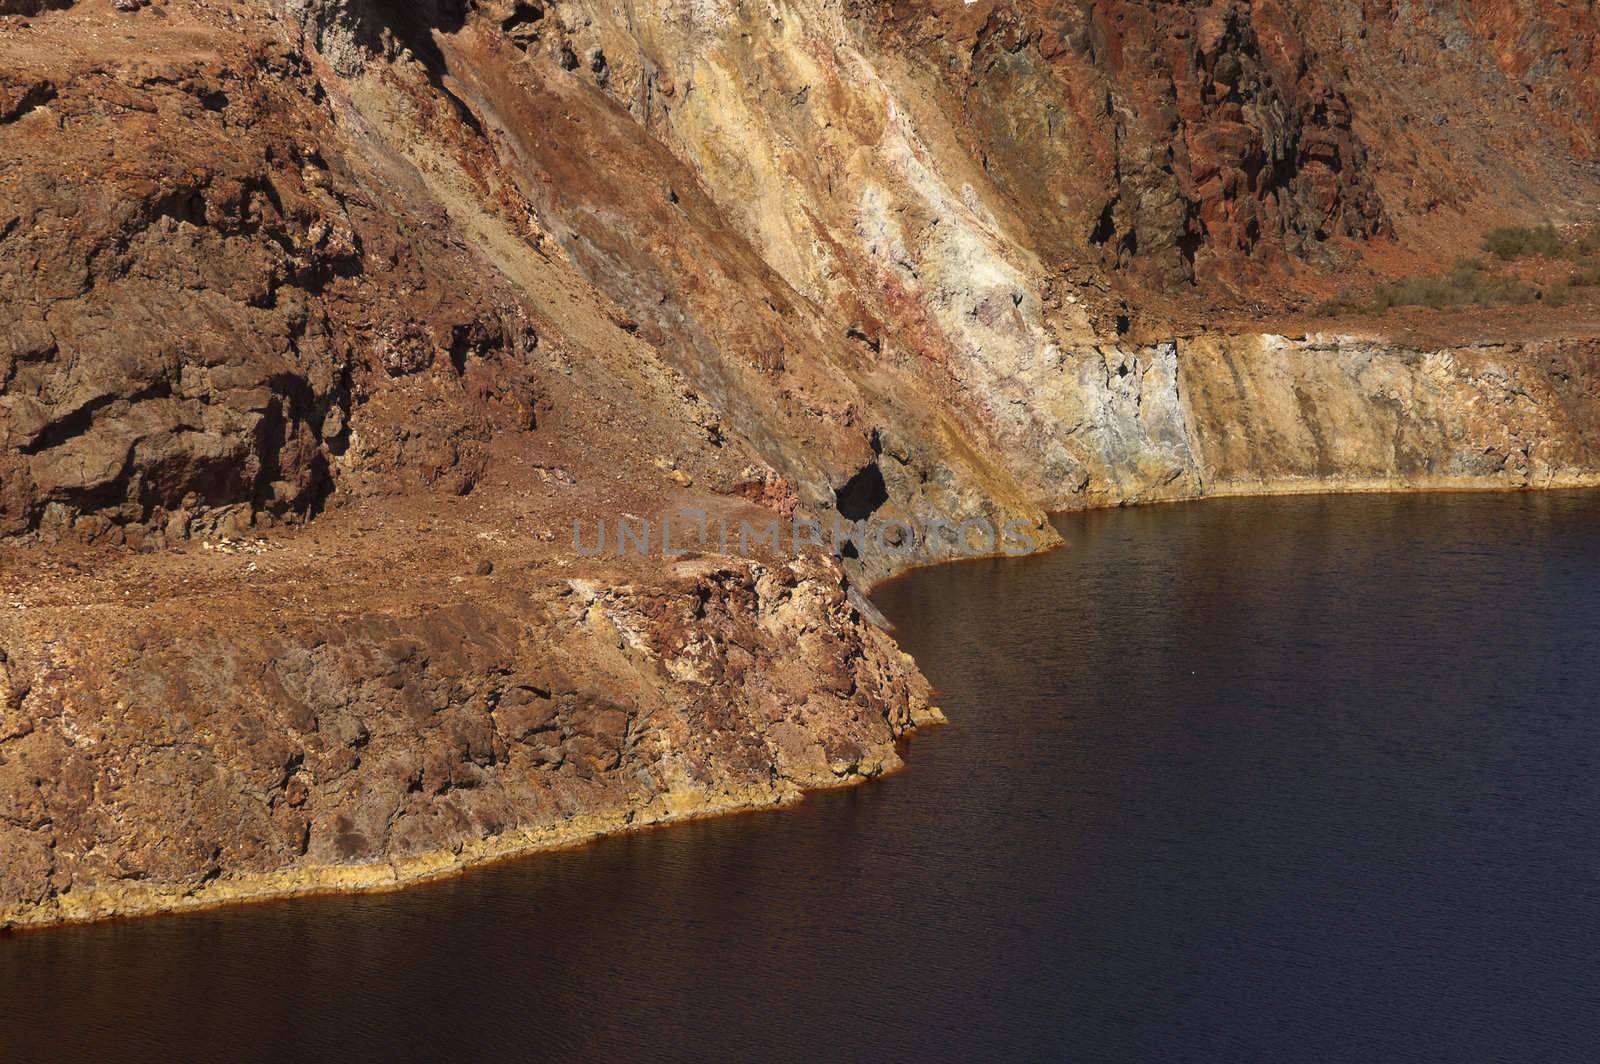 Detail of the São Domingos Mine, a deserted open-pit mine in Mertola, Alentejo, Portugal. This site is one of the volcanogenic massive sulfide ore deposits in the Iberian Pyrite Belt, which extends from the southern Portugal into Spain